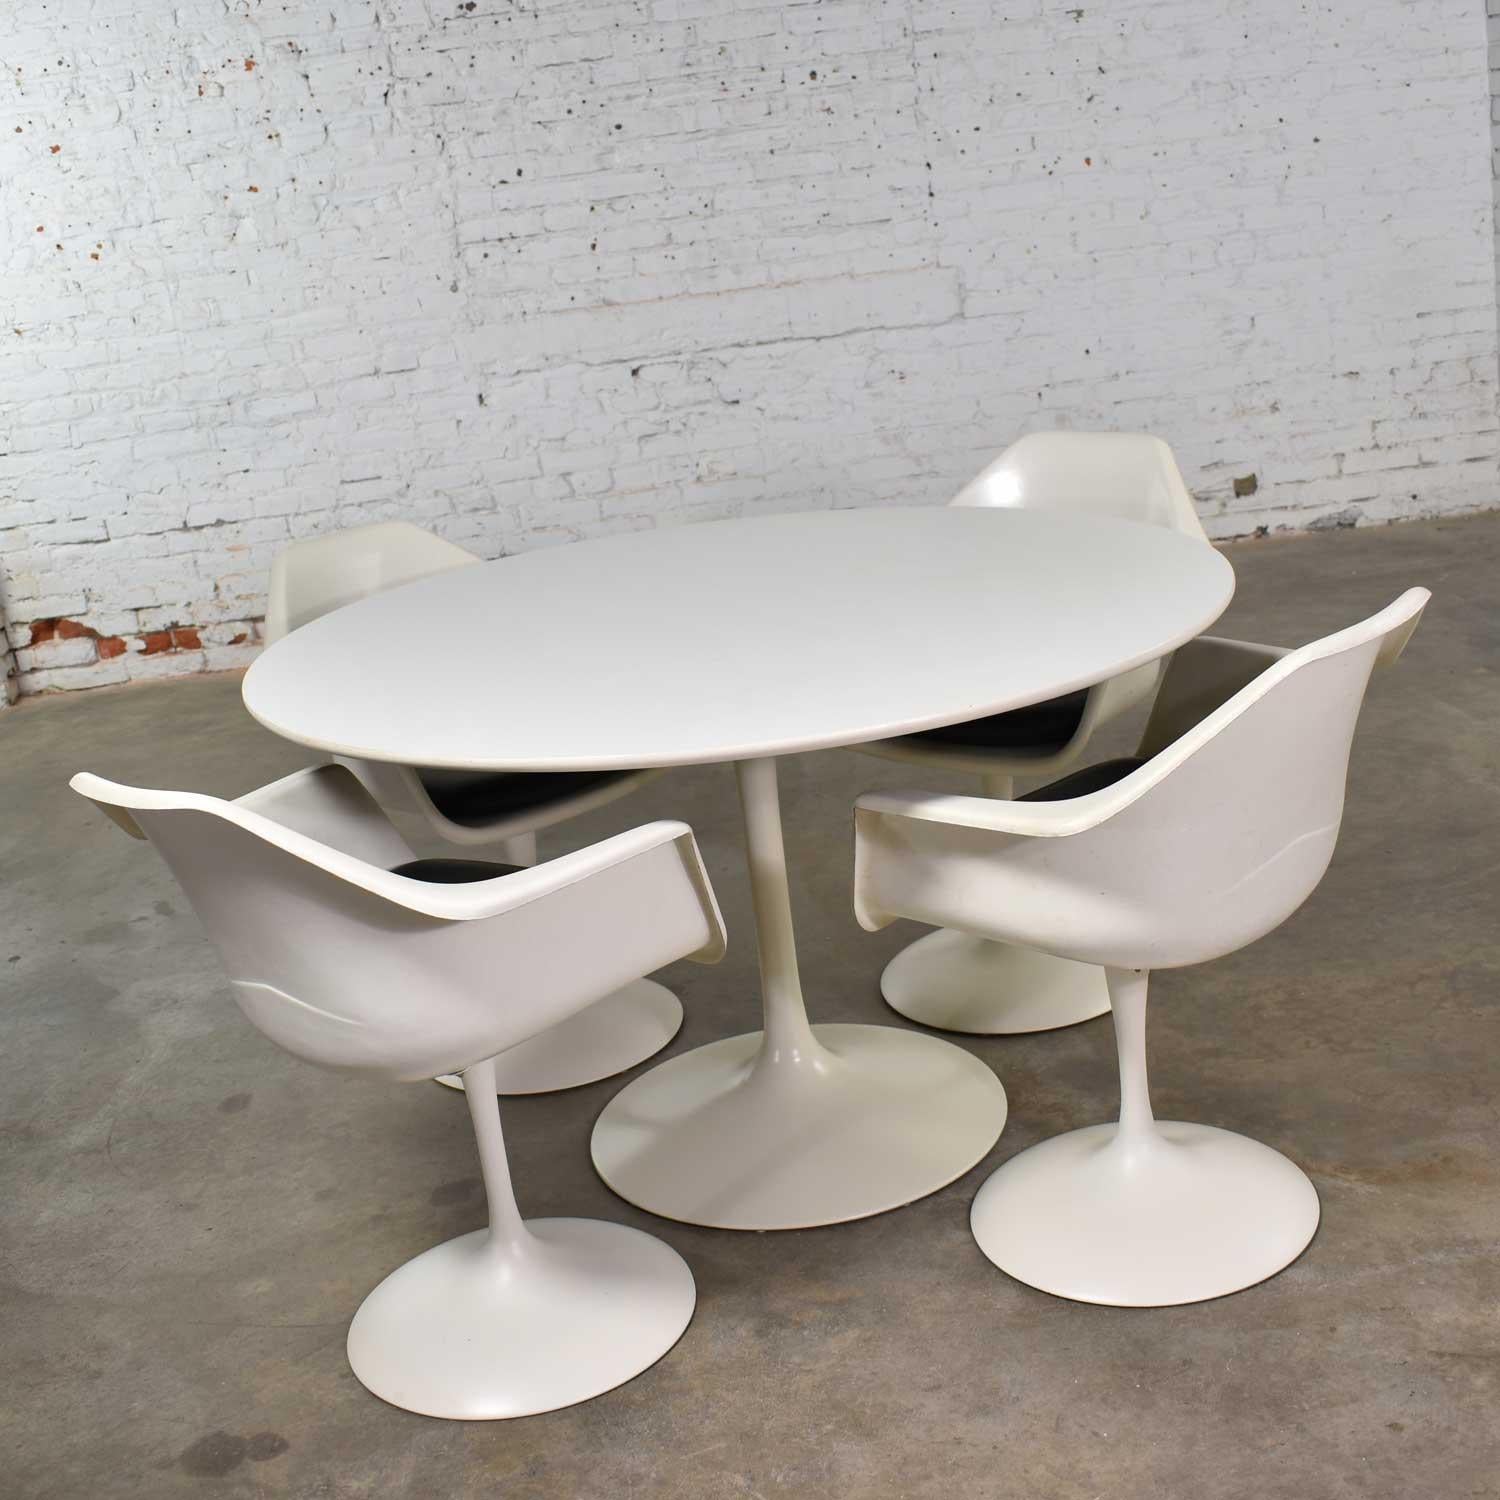 Handsome set of four tulip style white fiberglass swivel armchairs with black vinyl seat cushions and round dining table set by Arthur Umanoff for Contemporary Shells. These are era appropriate vintage chairs and table done in the style of Eero